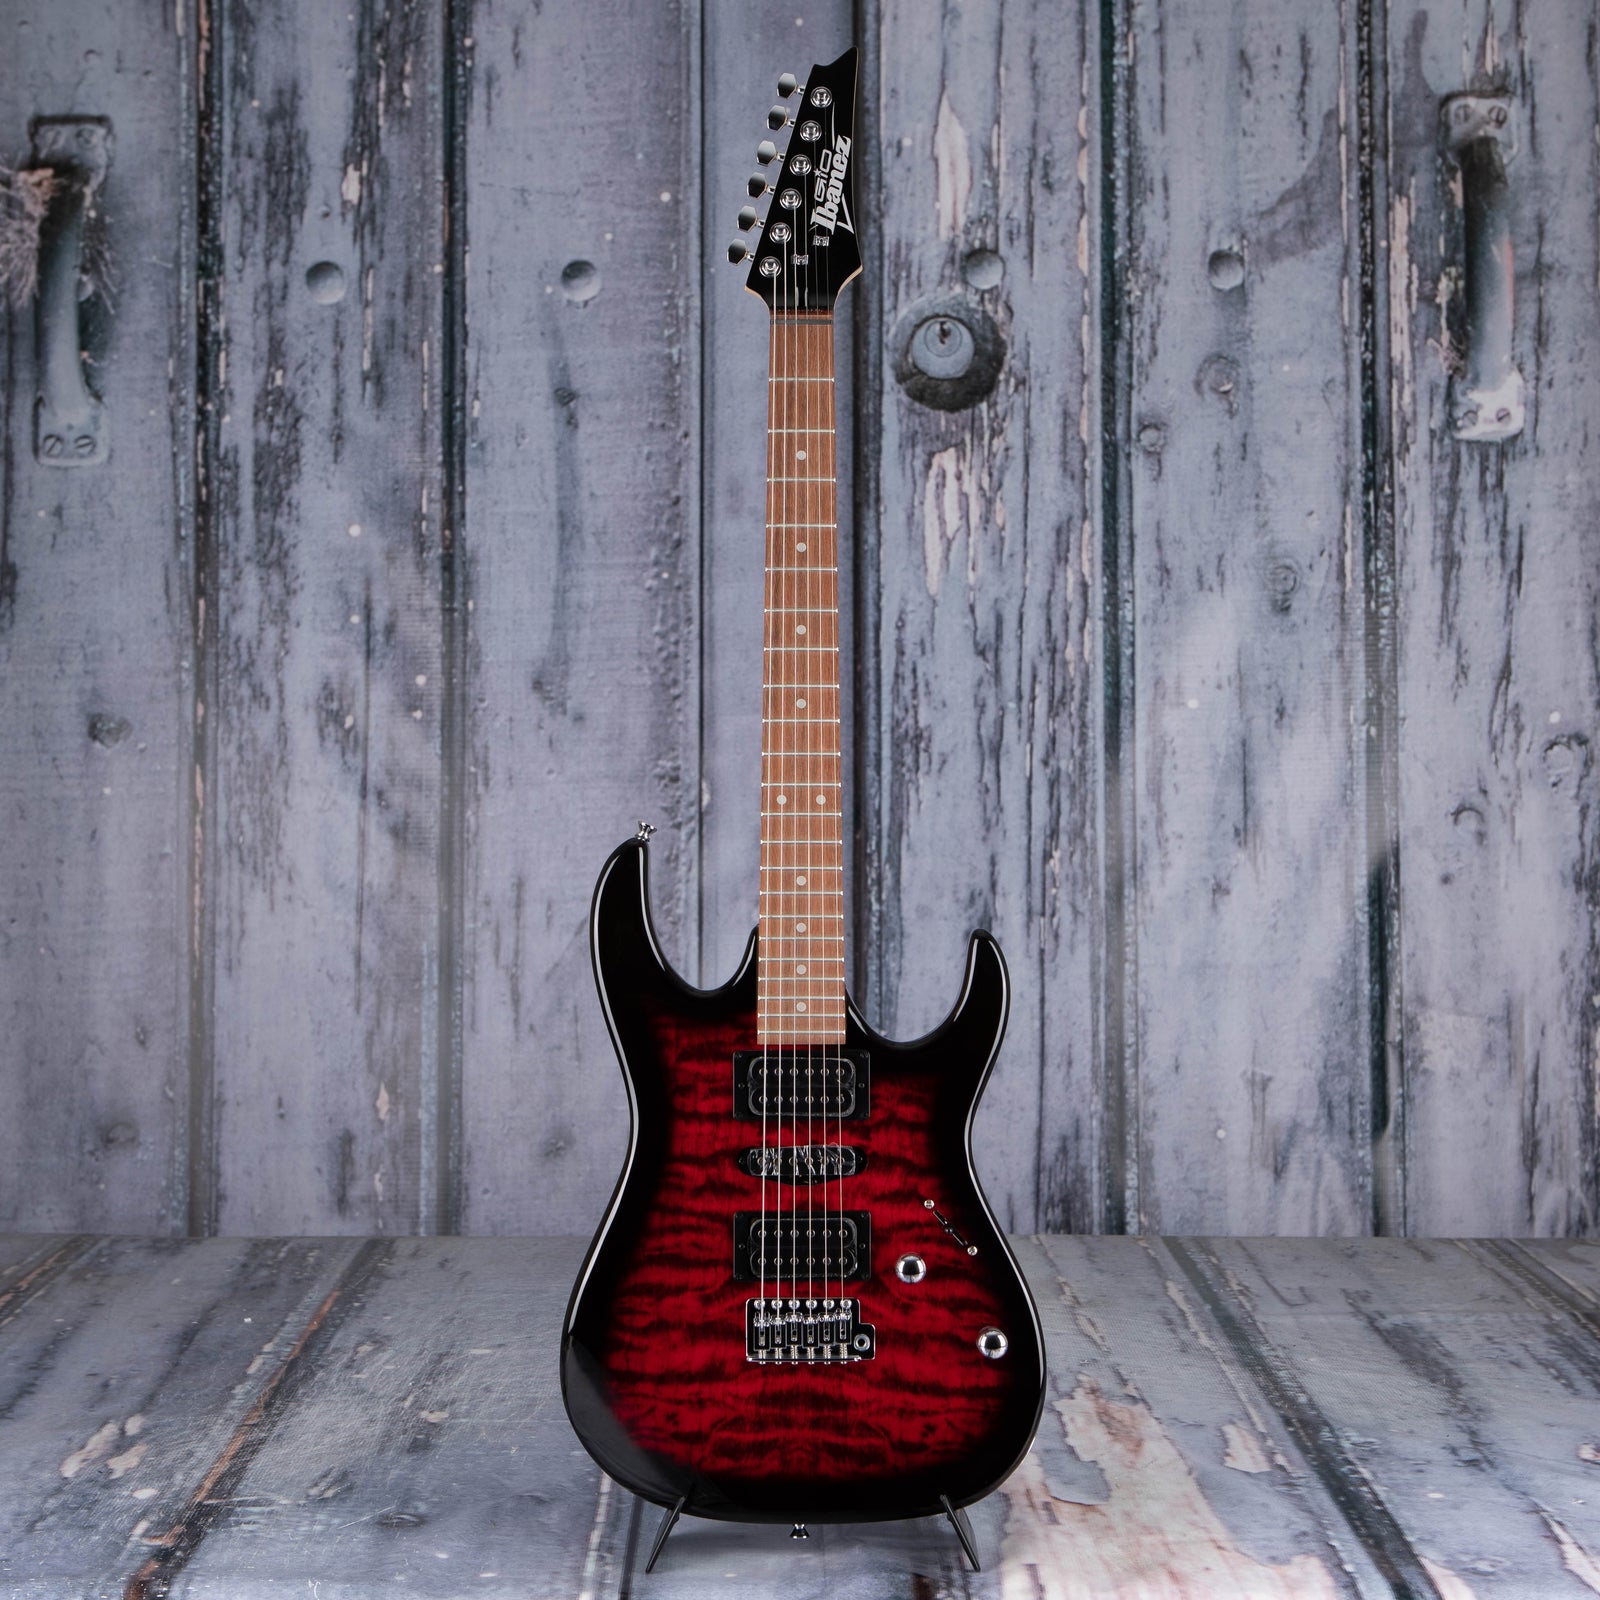 Ibanez Gio GRX70QA, Transparent Red Burst | For Sale | Replay 